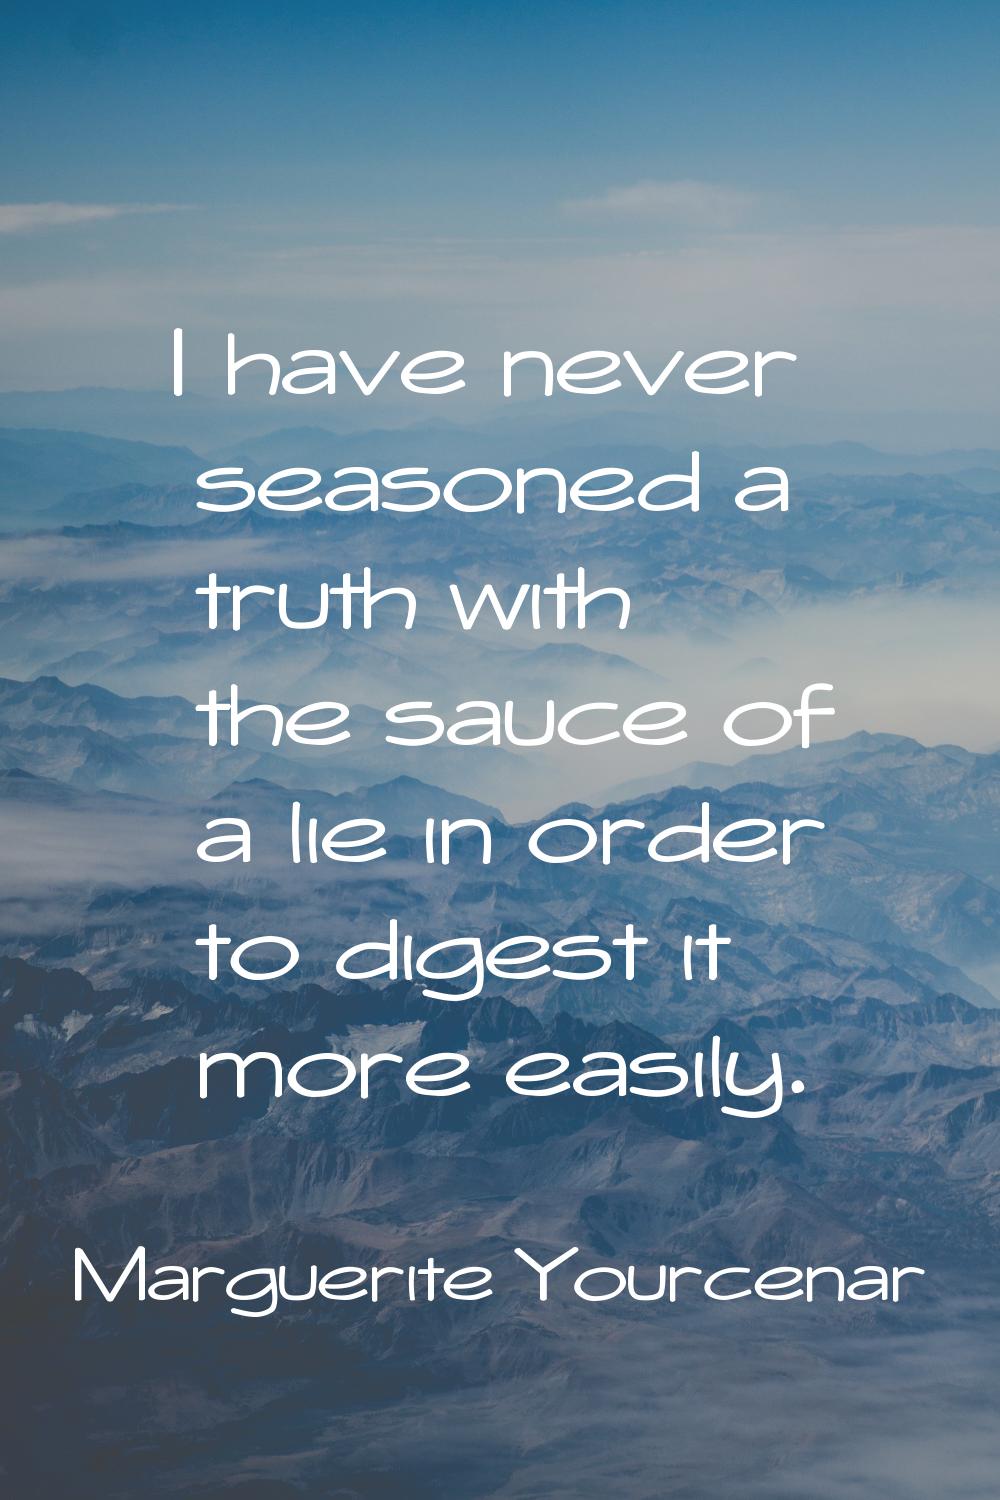 I have never seasoned a truth with the sauce of a lie in order to digest it more easily.